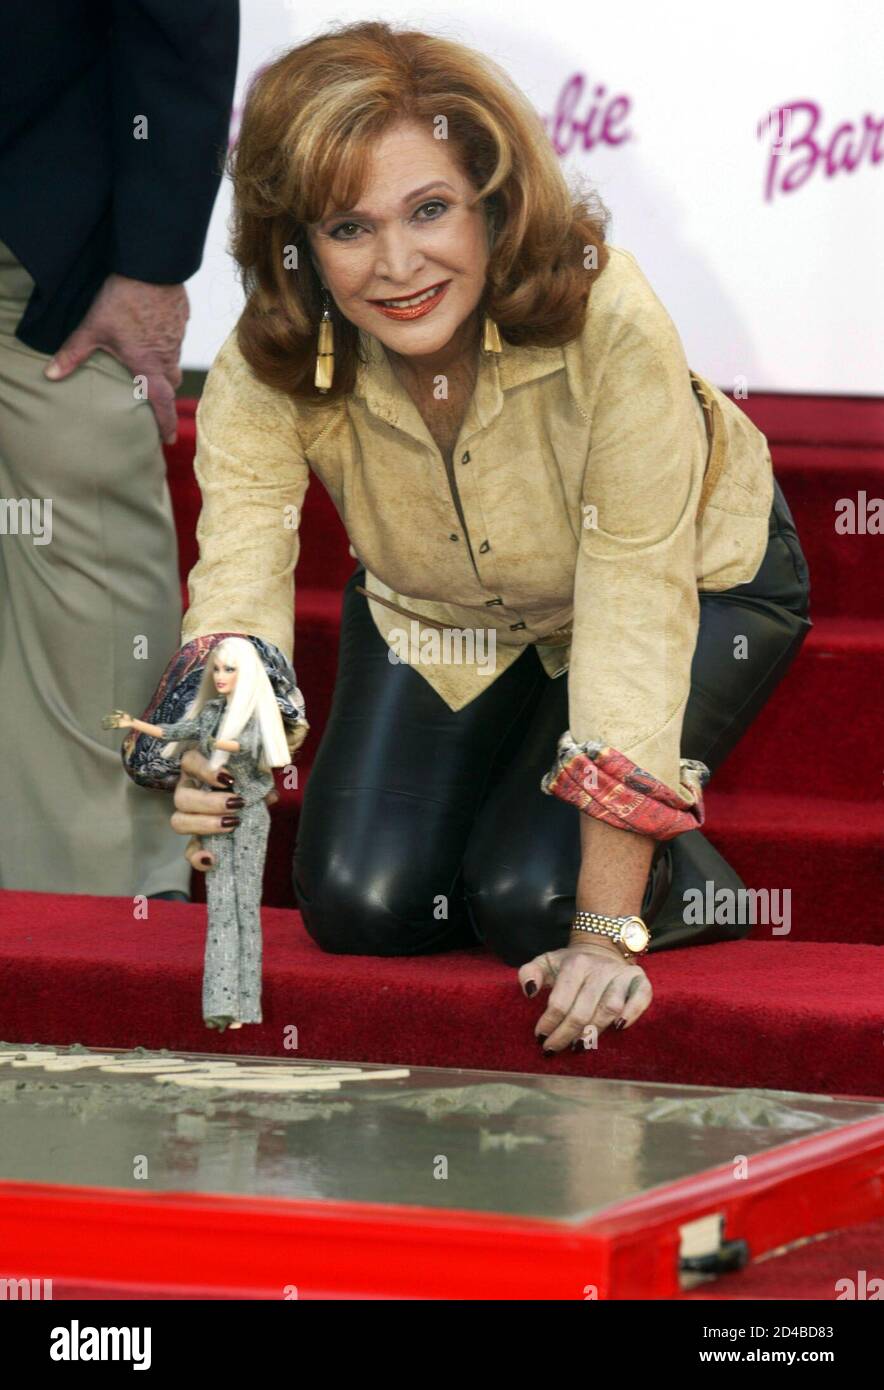 Barbara Handler, daughter of the creator of the Barbie doll, poses as she  holds a Barbie after placing the dolls hand and footprints in cement during  ceremonies November 13, 2002 in Hollywood